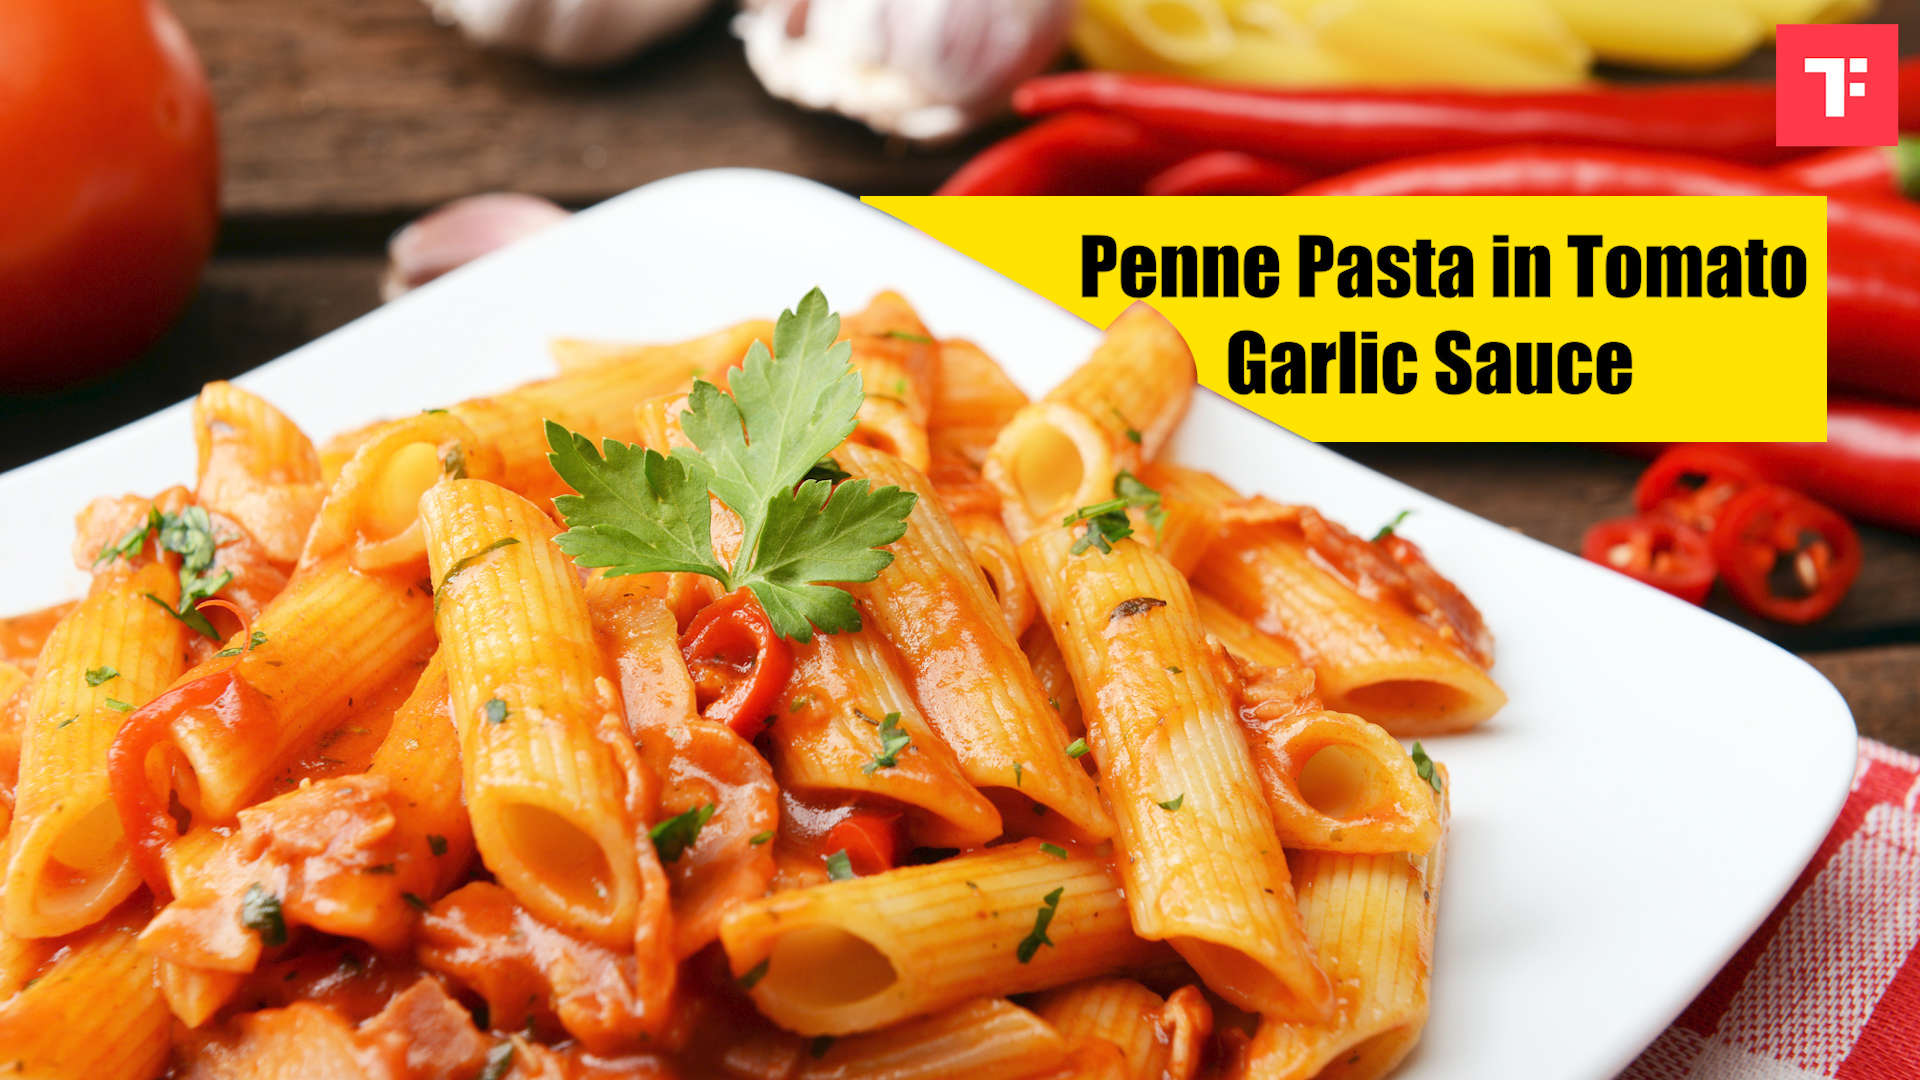 Watch: How to make Penne Pasta in Tomato Garlic Sauce - Times Food